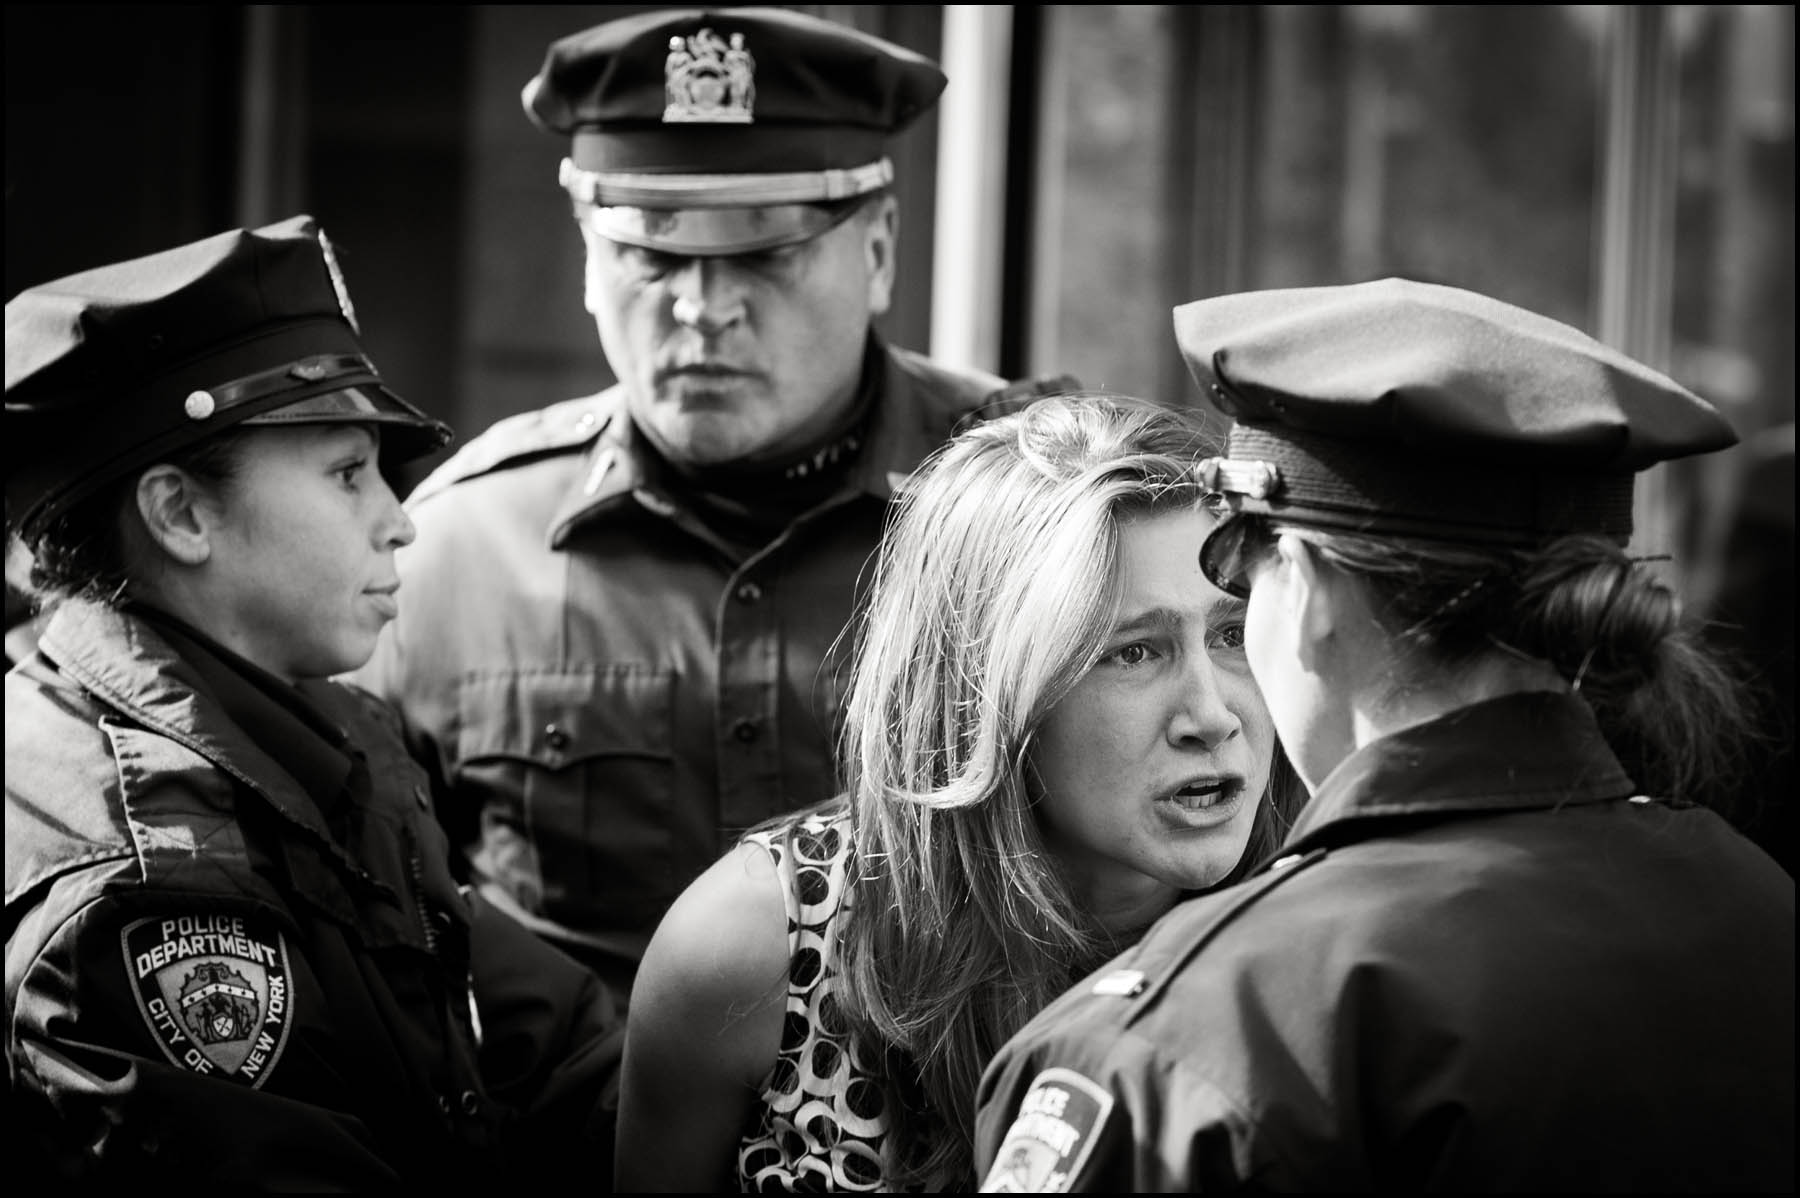 A young girl pleads with police as a group of Occupy Wall Street protesters get arrested in front of Goldman Sachs headquarters in Battery Park City after they held a mock trial against the company.